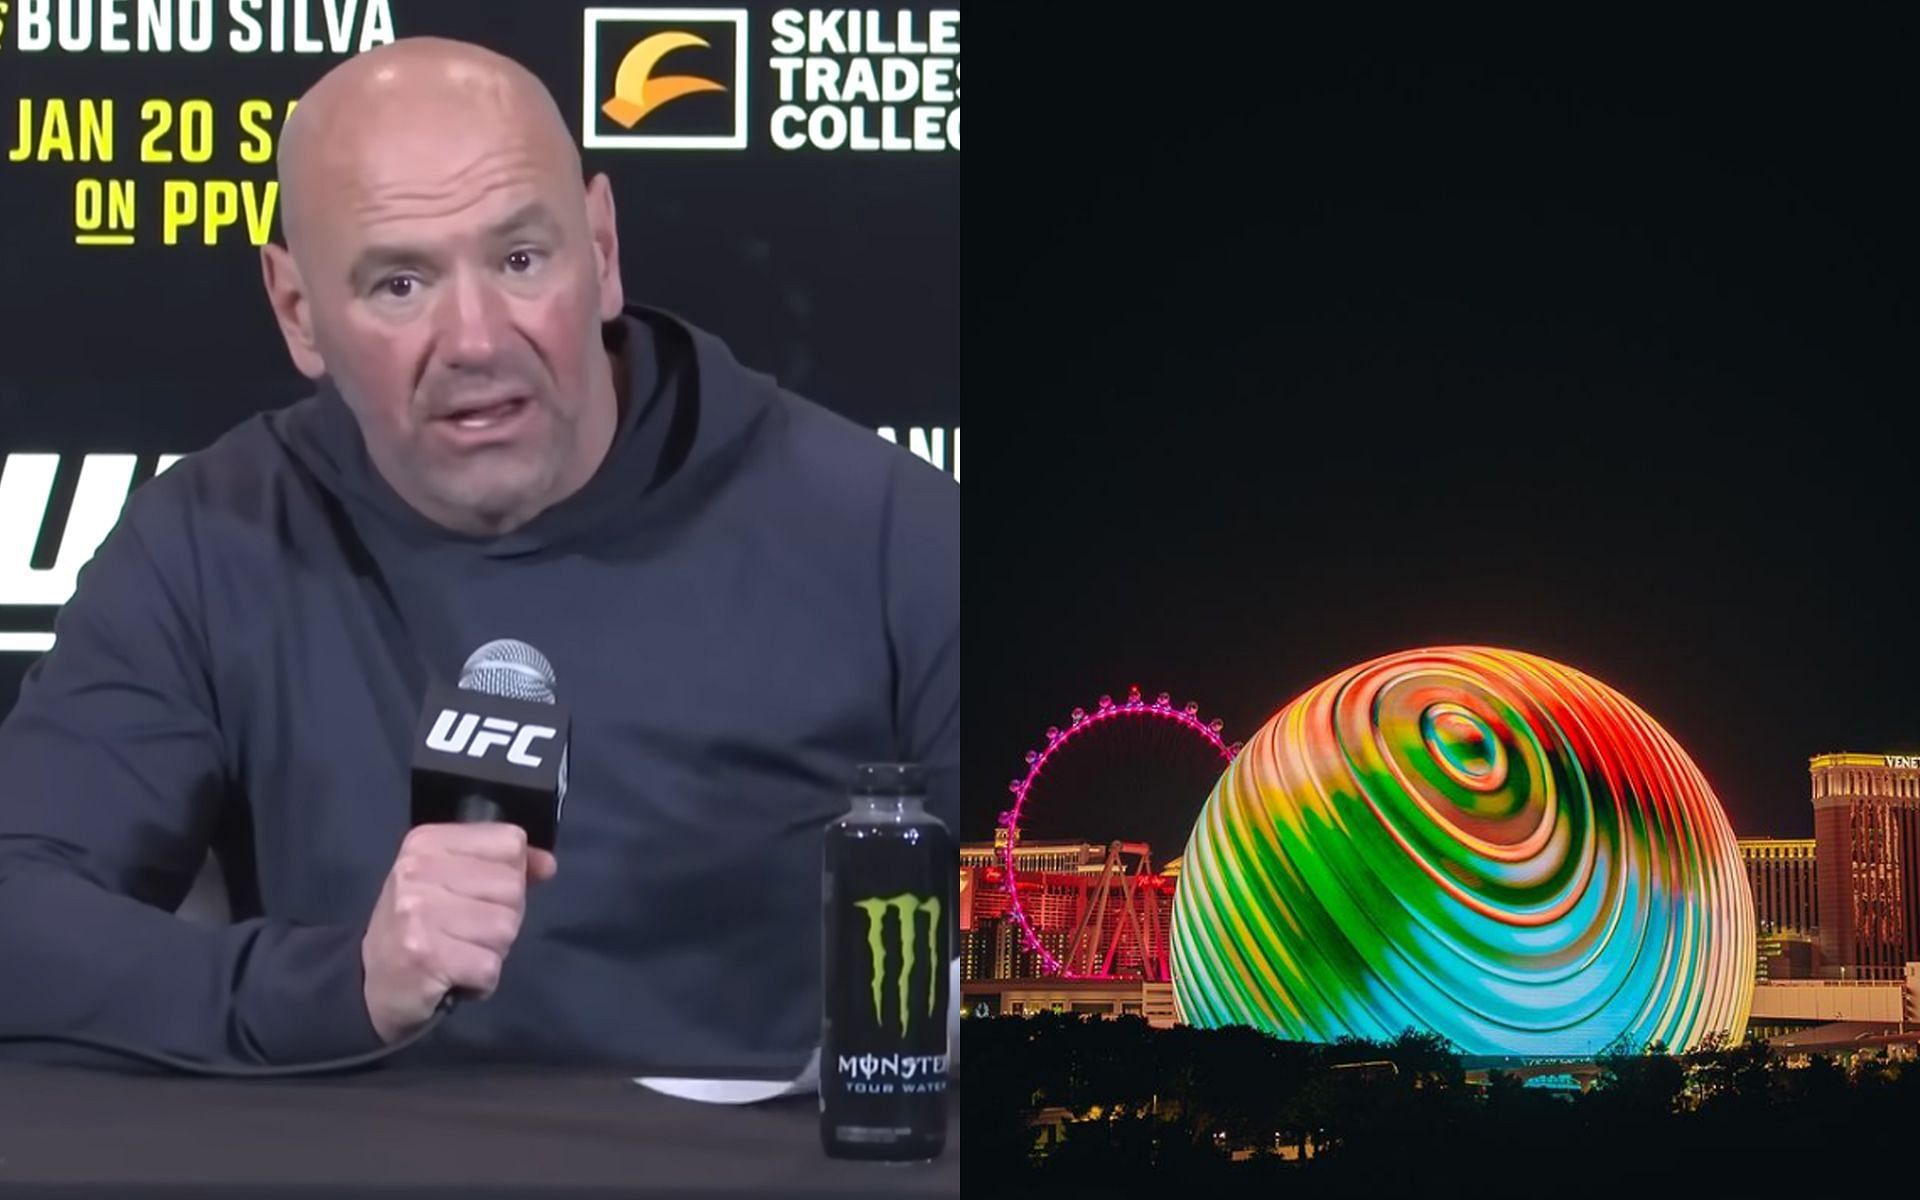 Dana White (left) is intent on delivering a great show at the Sphere (right) [Images Courtesy: @spherevegas Instagram and UFC YouTube]